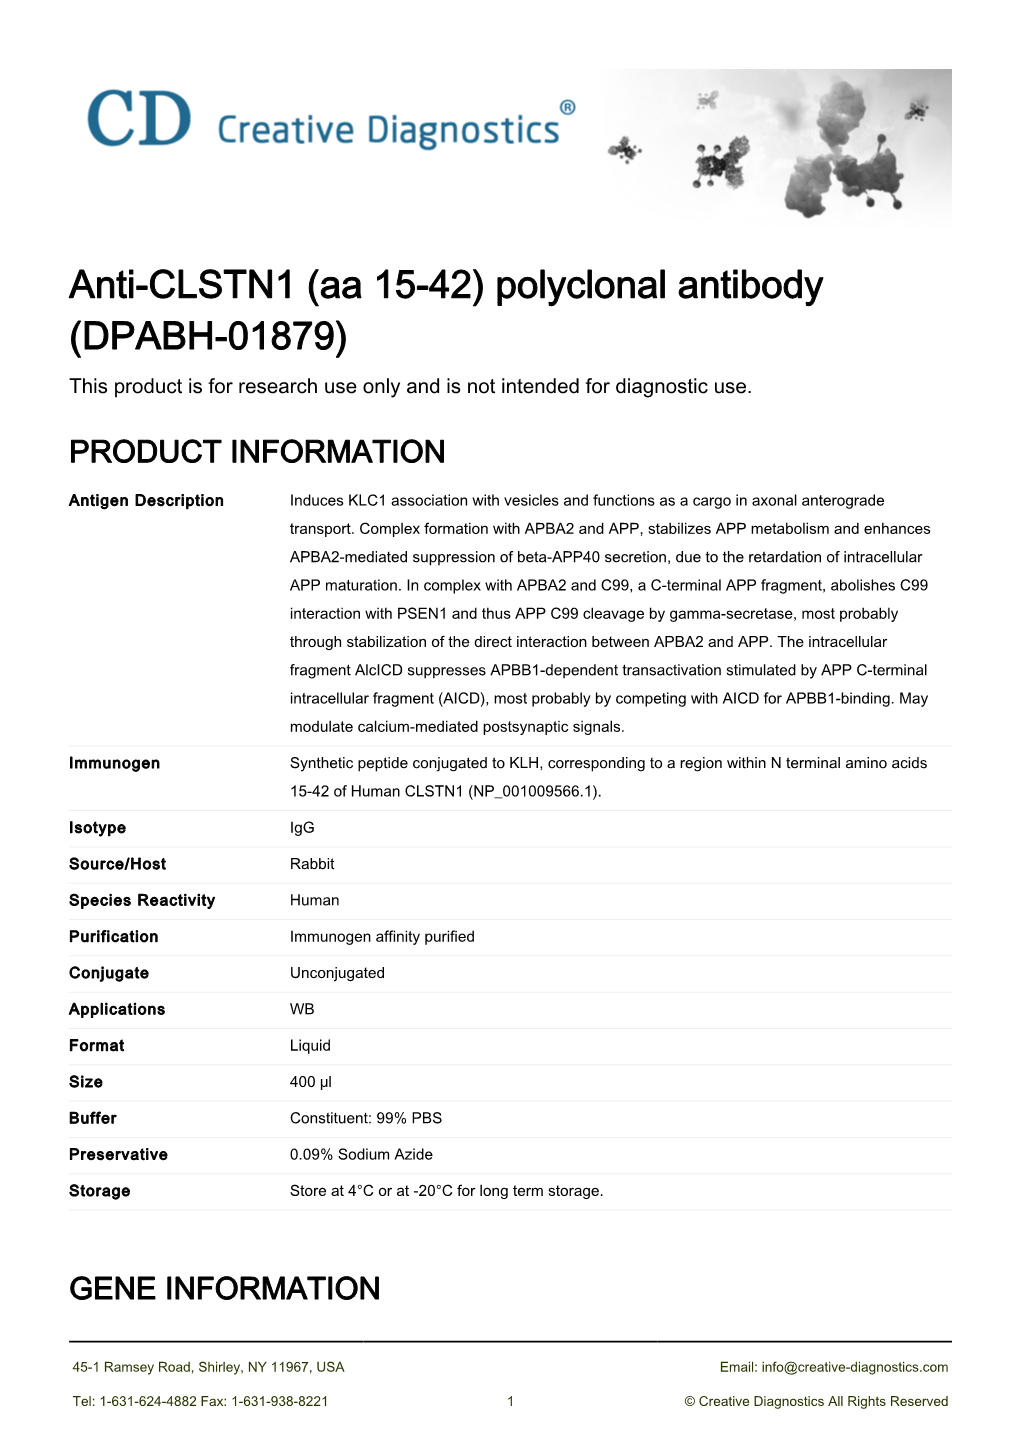 Anti-CLSTN1 (Aa 15-42) Polyclonal Antibody (DPABH-01879) This Product Is for Research Use Only and Is Not Intended for Diagnostic Use